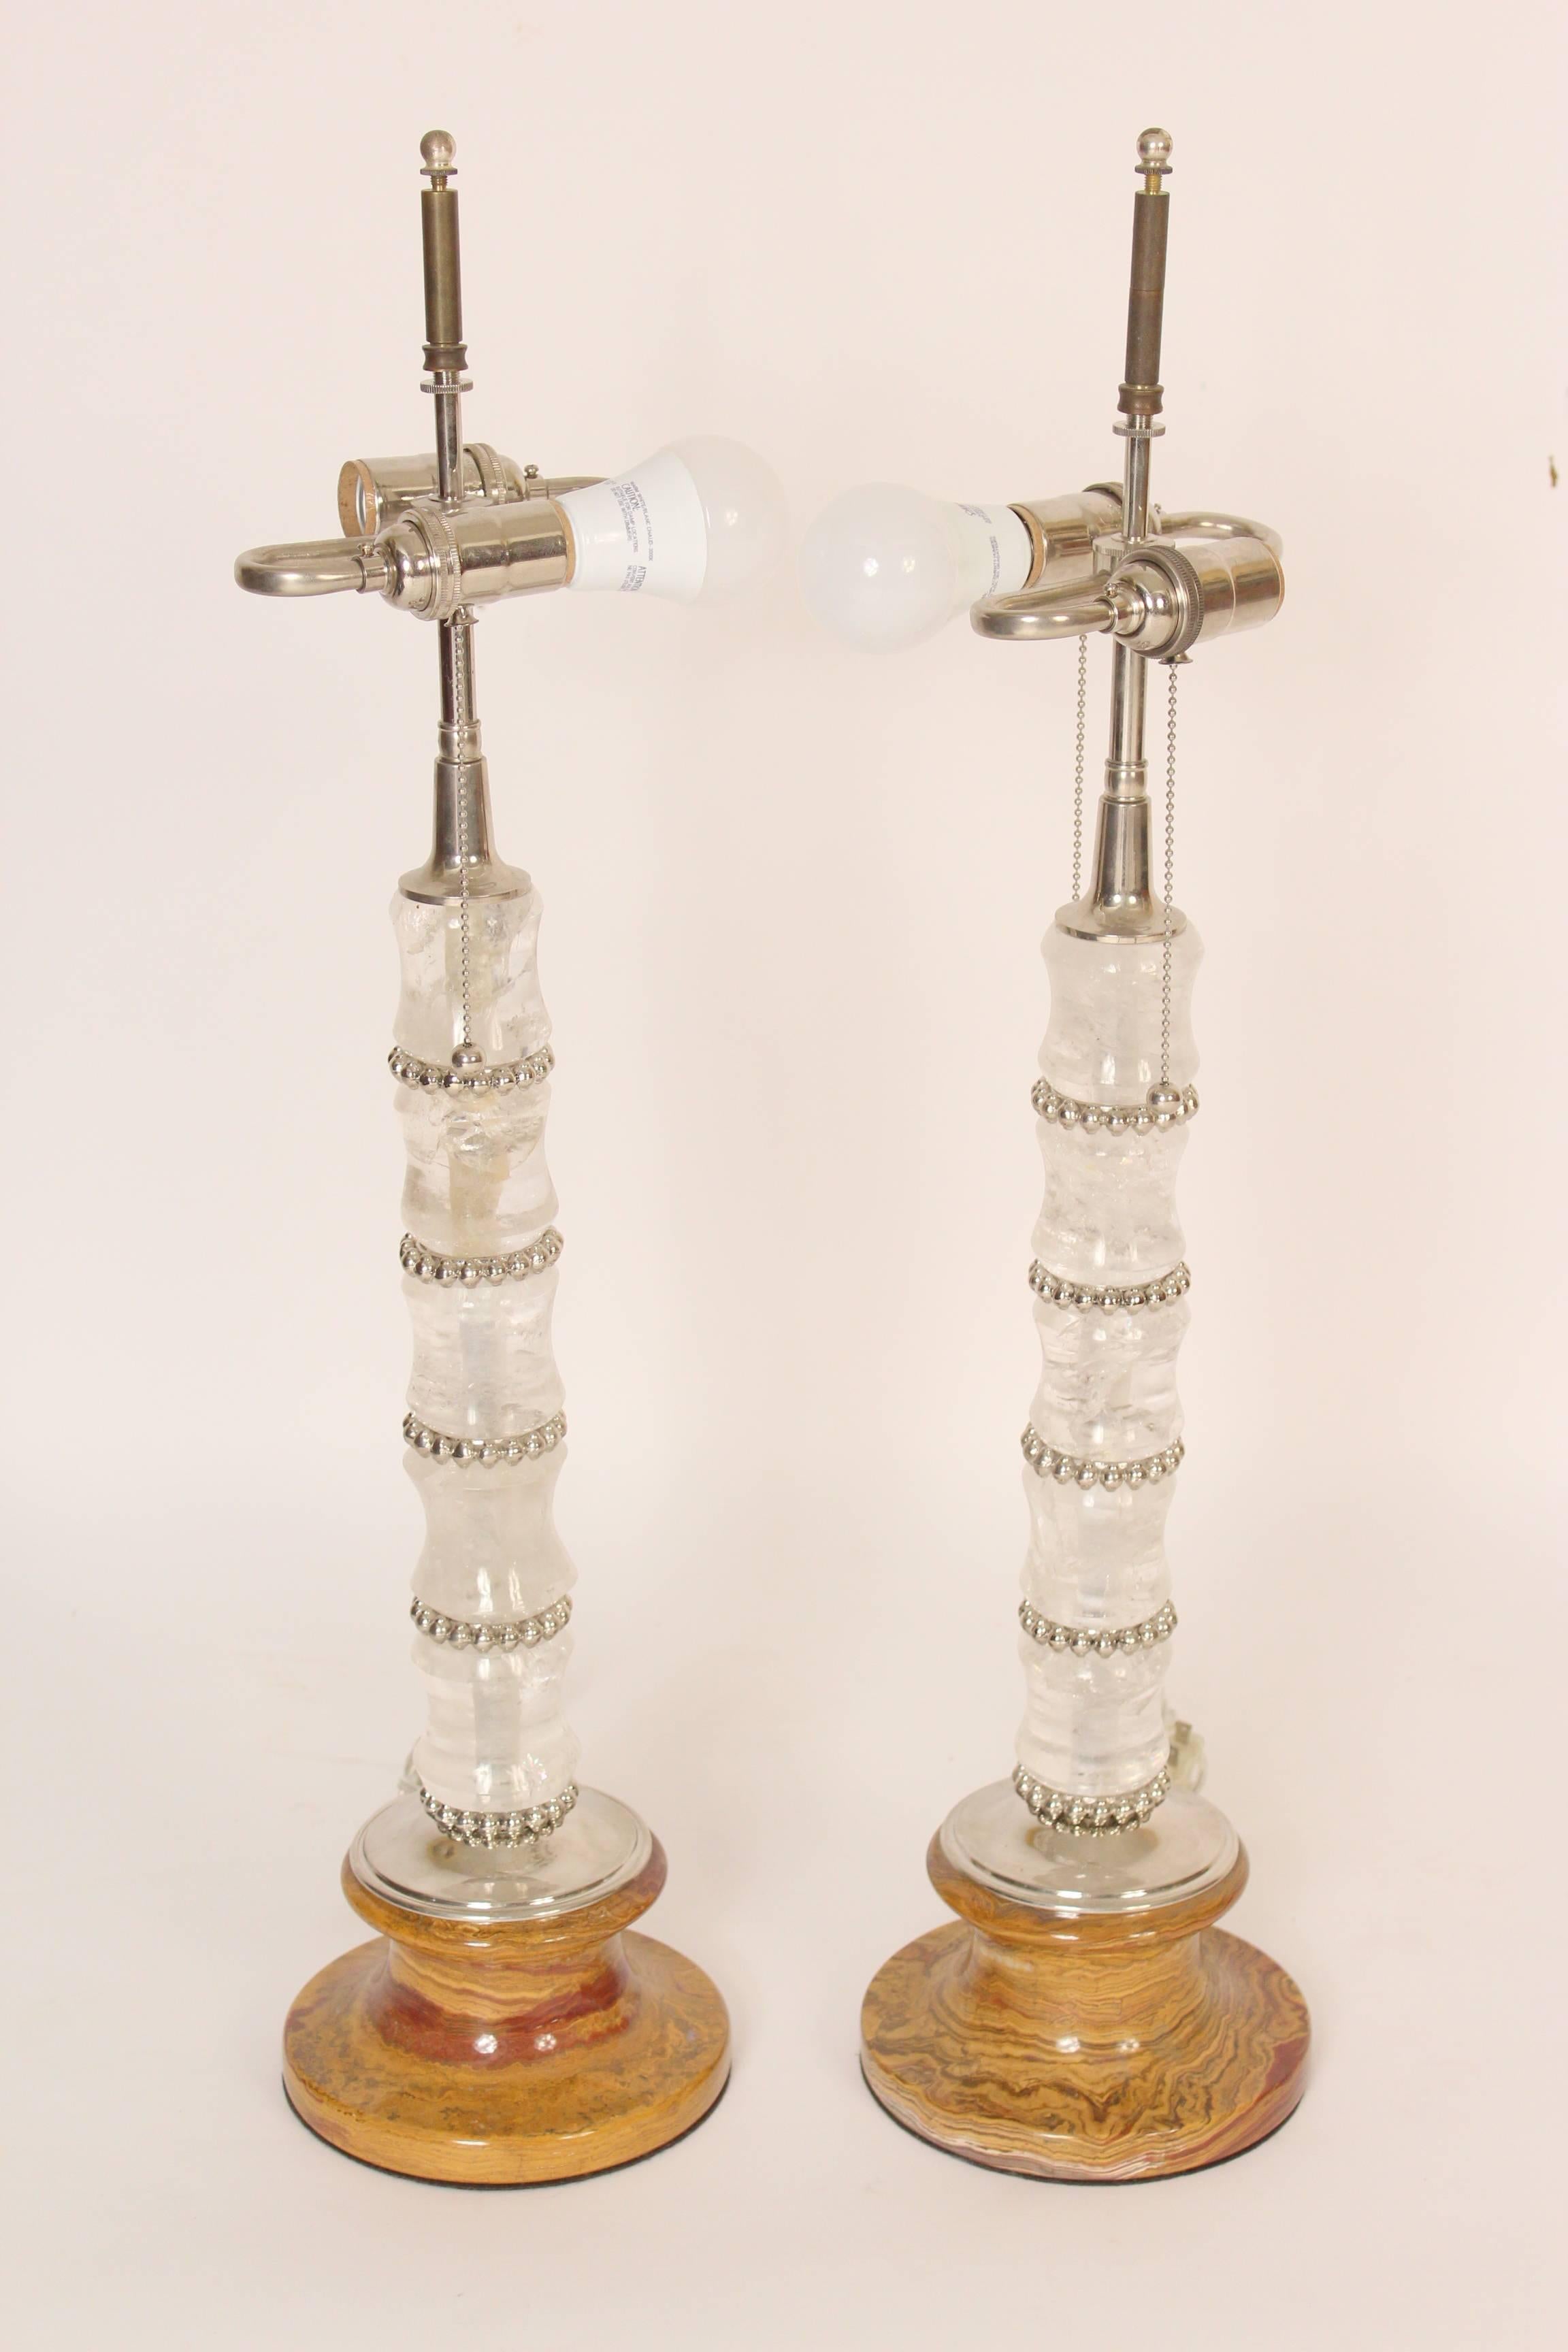 Pair of spool turned rock crystal and marble table lamps with polished nickel hardware, circa 2000. The height from the marble base to the beginning of the electrical fitting is 19